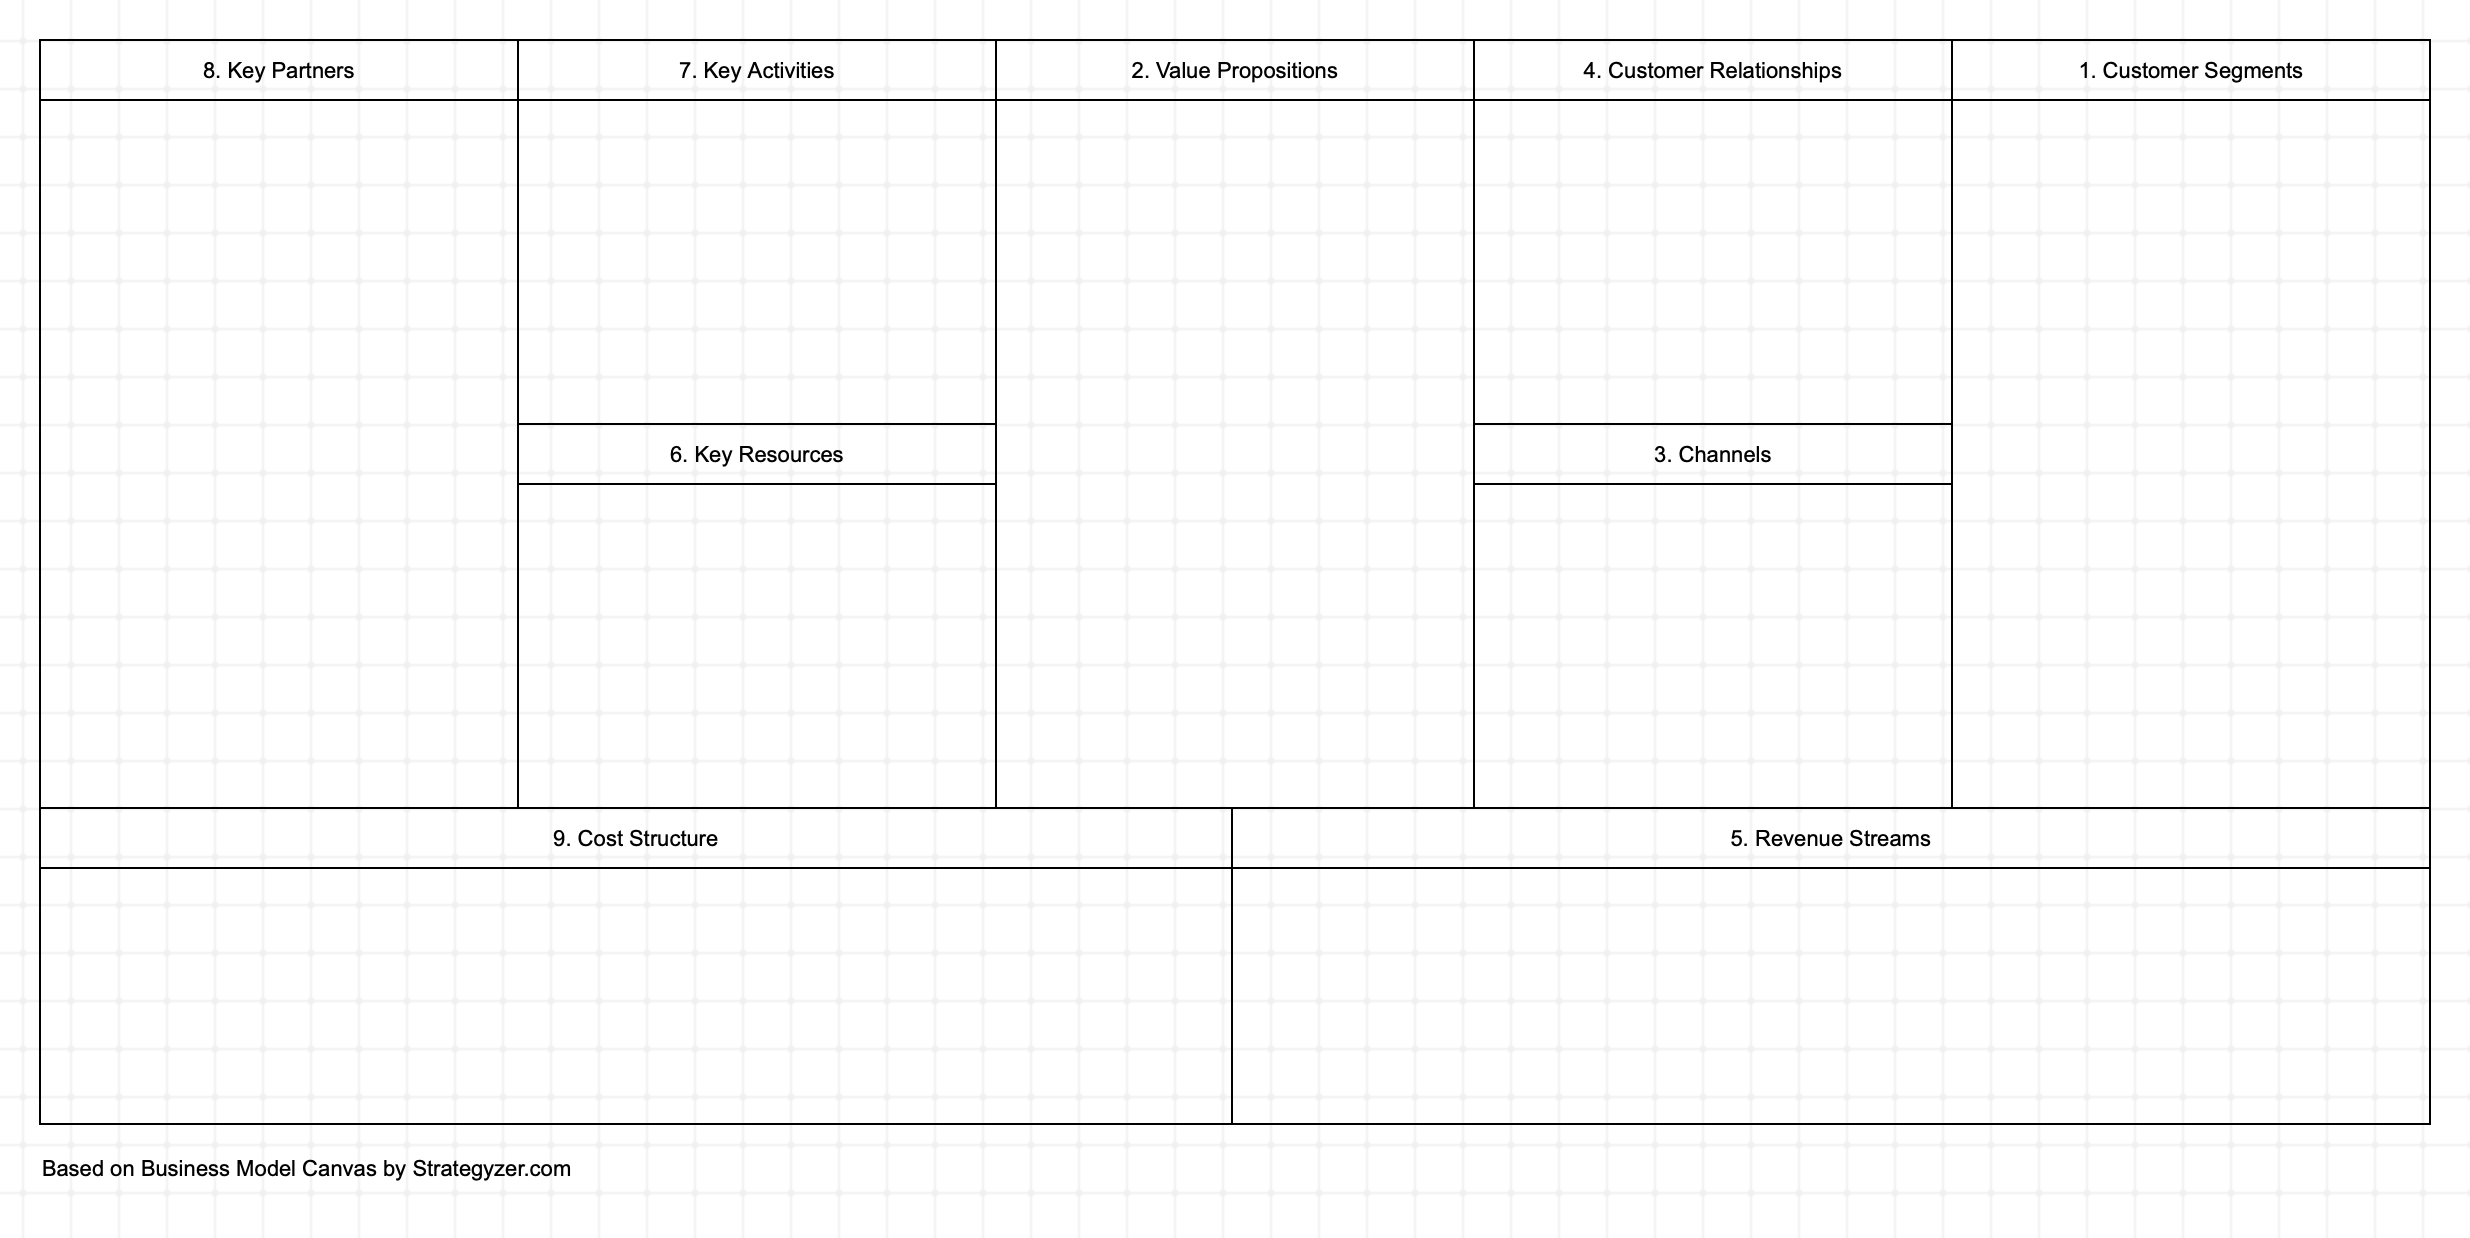 The template for Business Model Canvas in BSC Designer